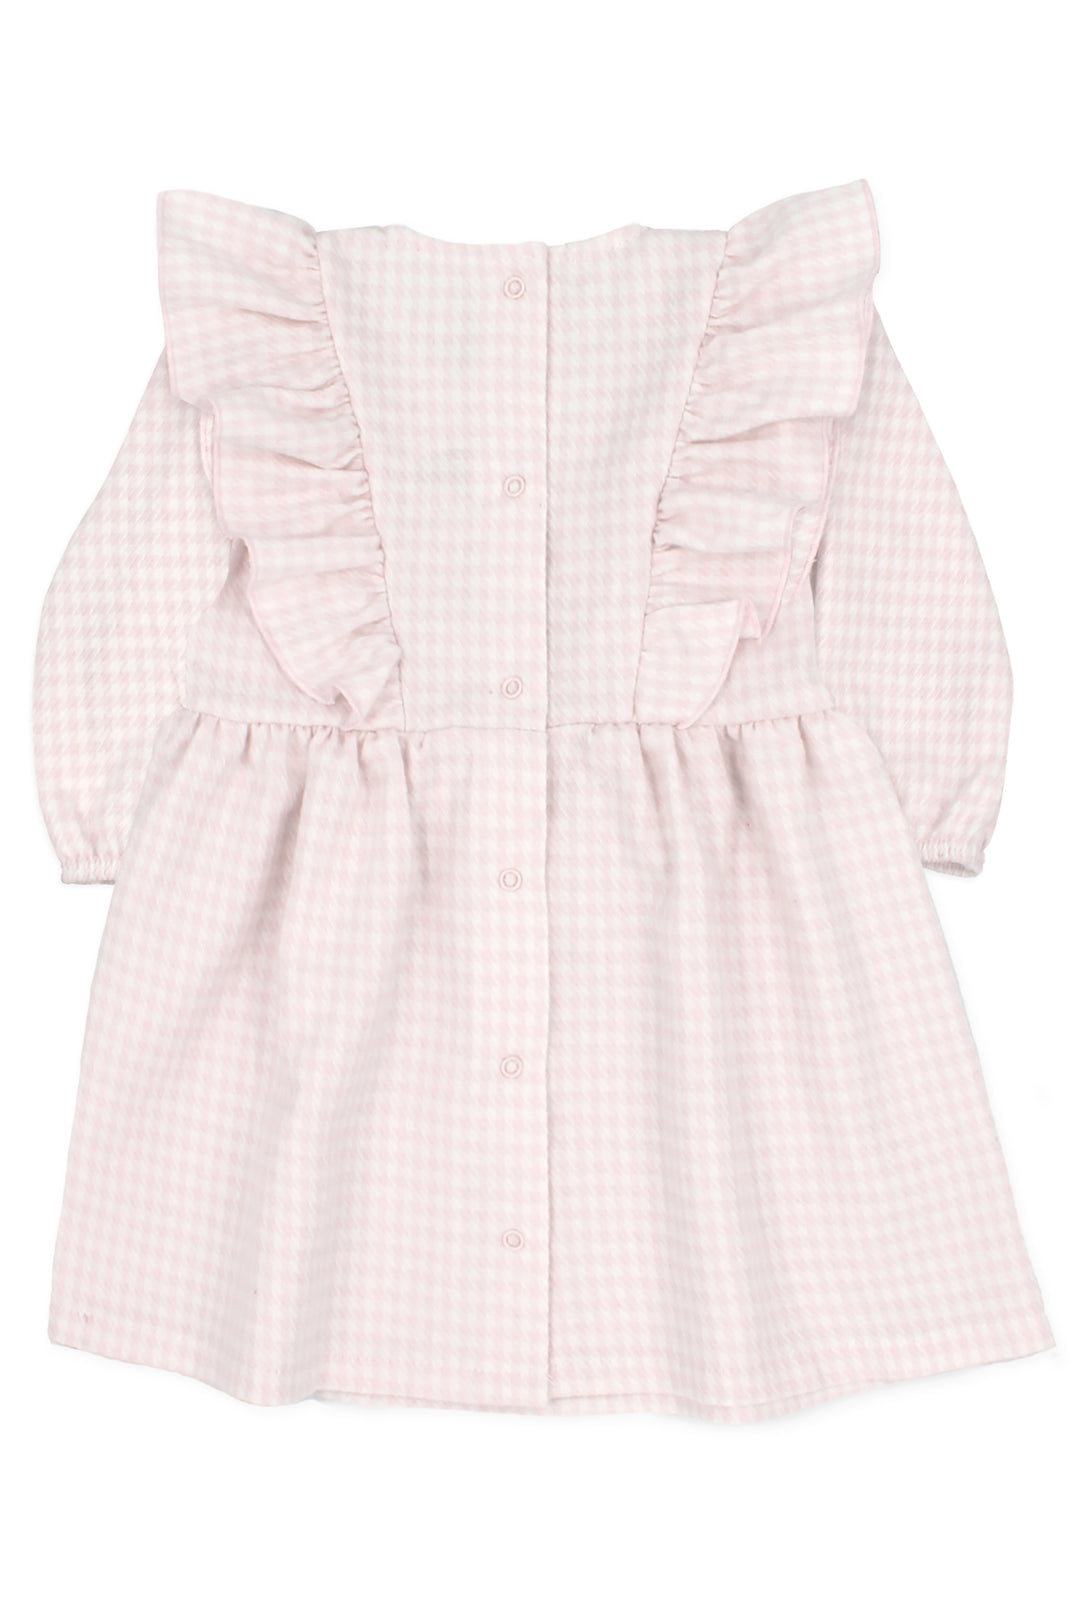 Rapife "Coraline" Pink Houndstooth Dress | Millie and John